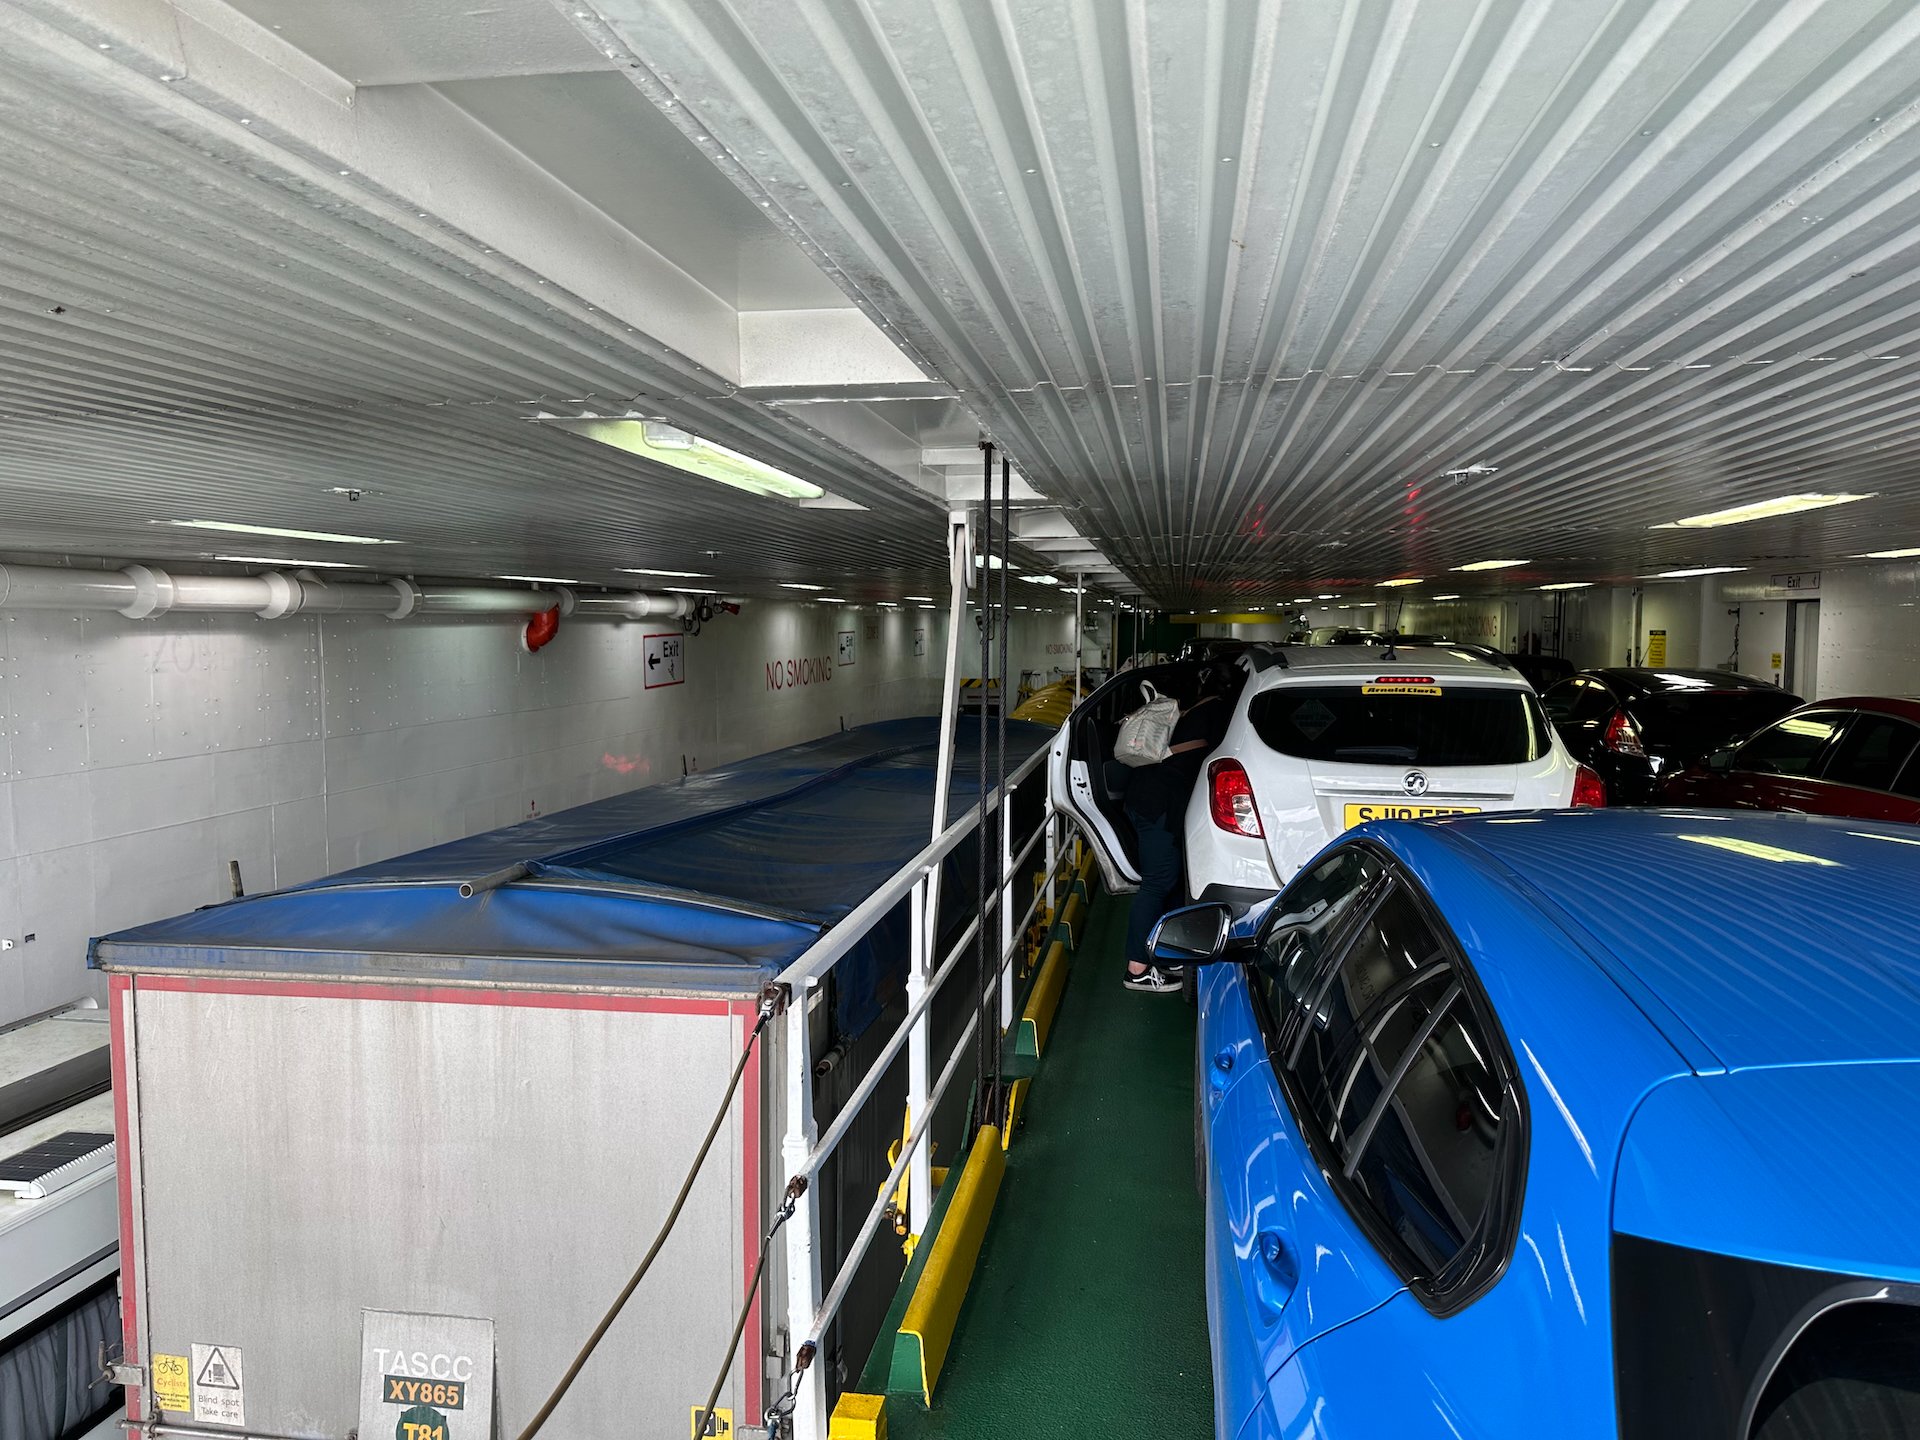  We were parked up on this ramp that they raised up in the air after loading all the cars, allowing them to put another row underneath, and the big trucks beside us. 